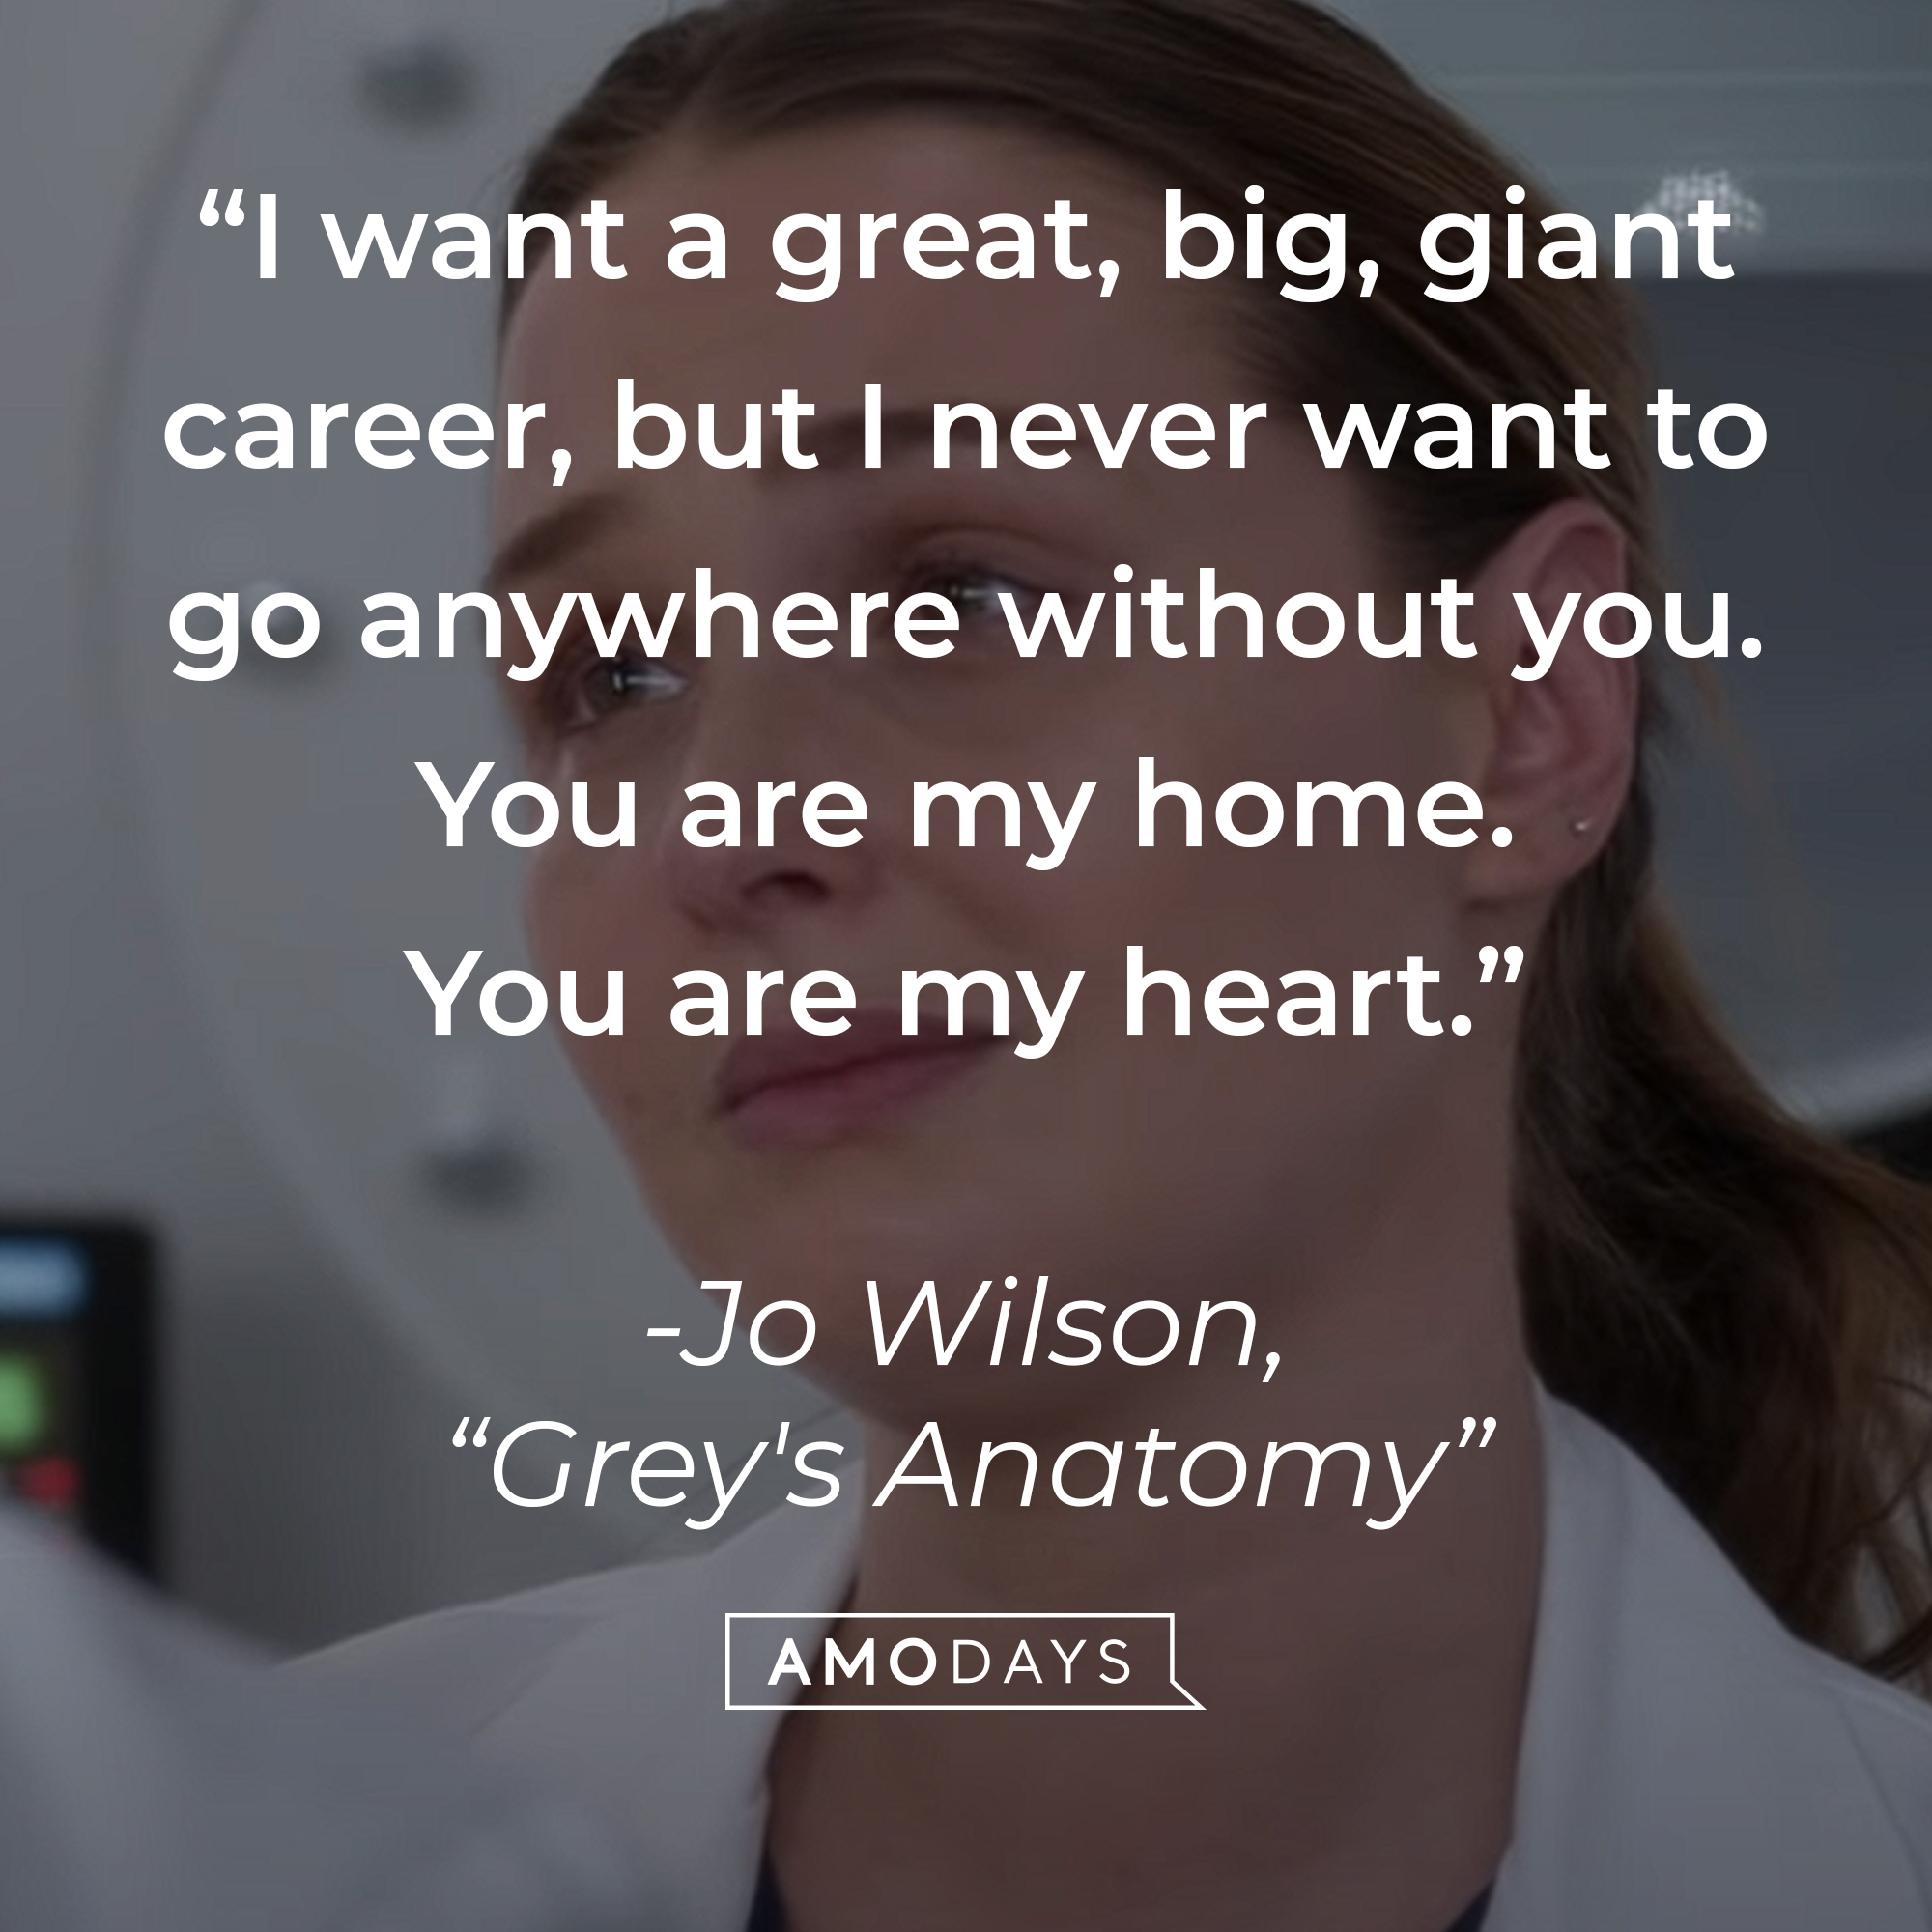 Jo Wilson’s quote from “Grey’s Anatomy”: “I want a great, big, giant career, but I never want to go anywhere without you. You are my home. You are my heart.” | Source: youtube.com/ABCNetwork